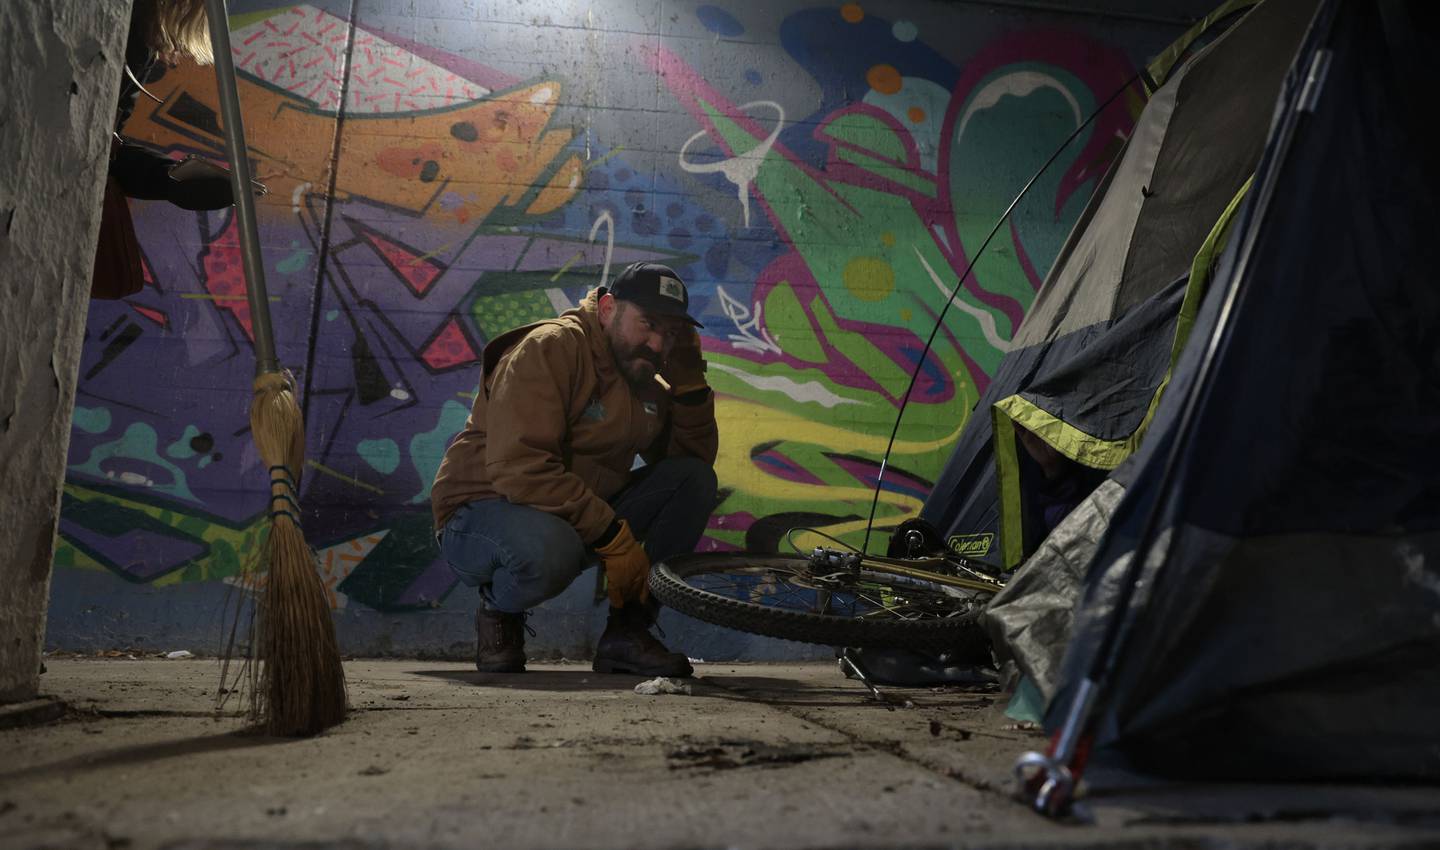 Andy Robledo, who has been building winterized tents for individuals experiencing homelessness around the city in the past year, speaks with a person under a viaduct at South Union Avenue and West 16th Street on Dec. 20, 2022.